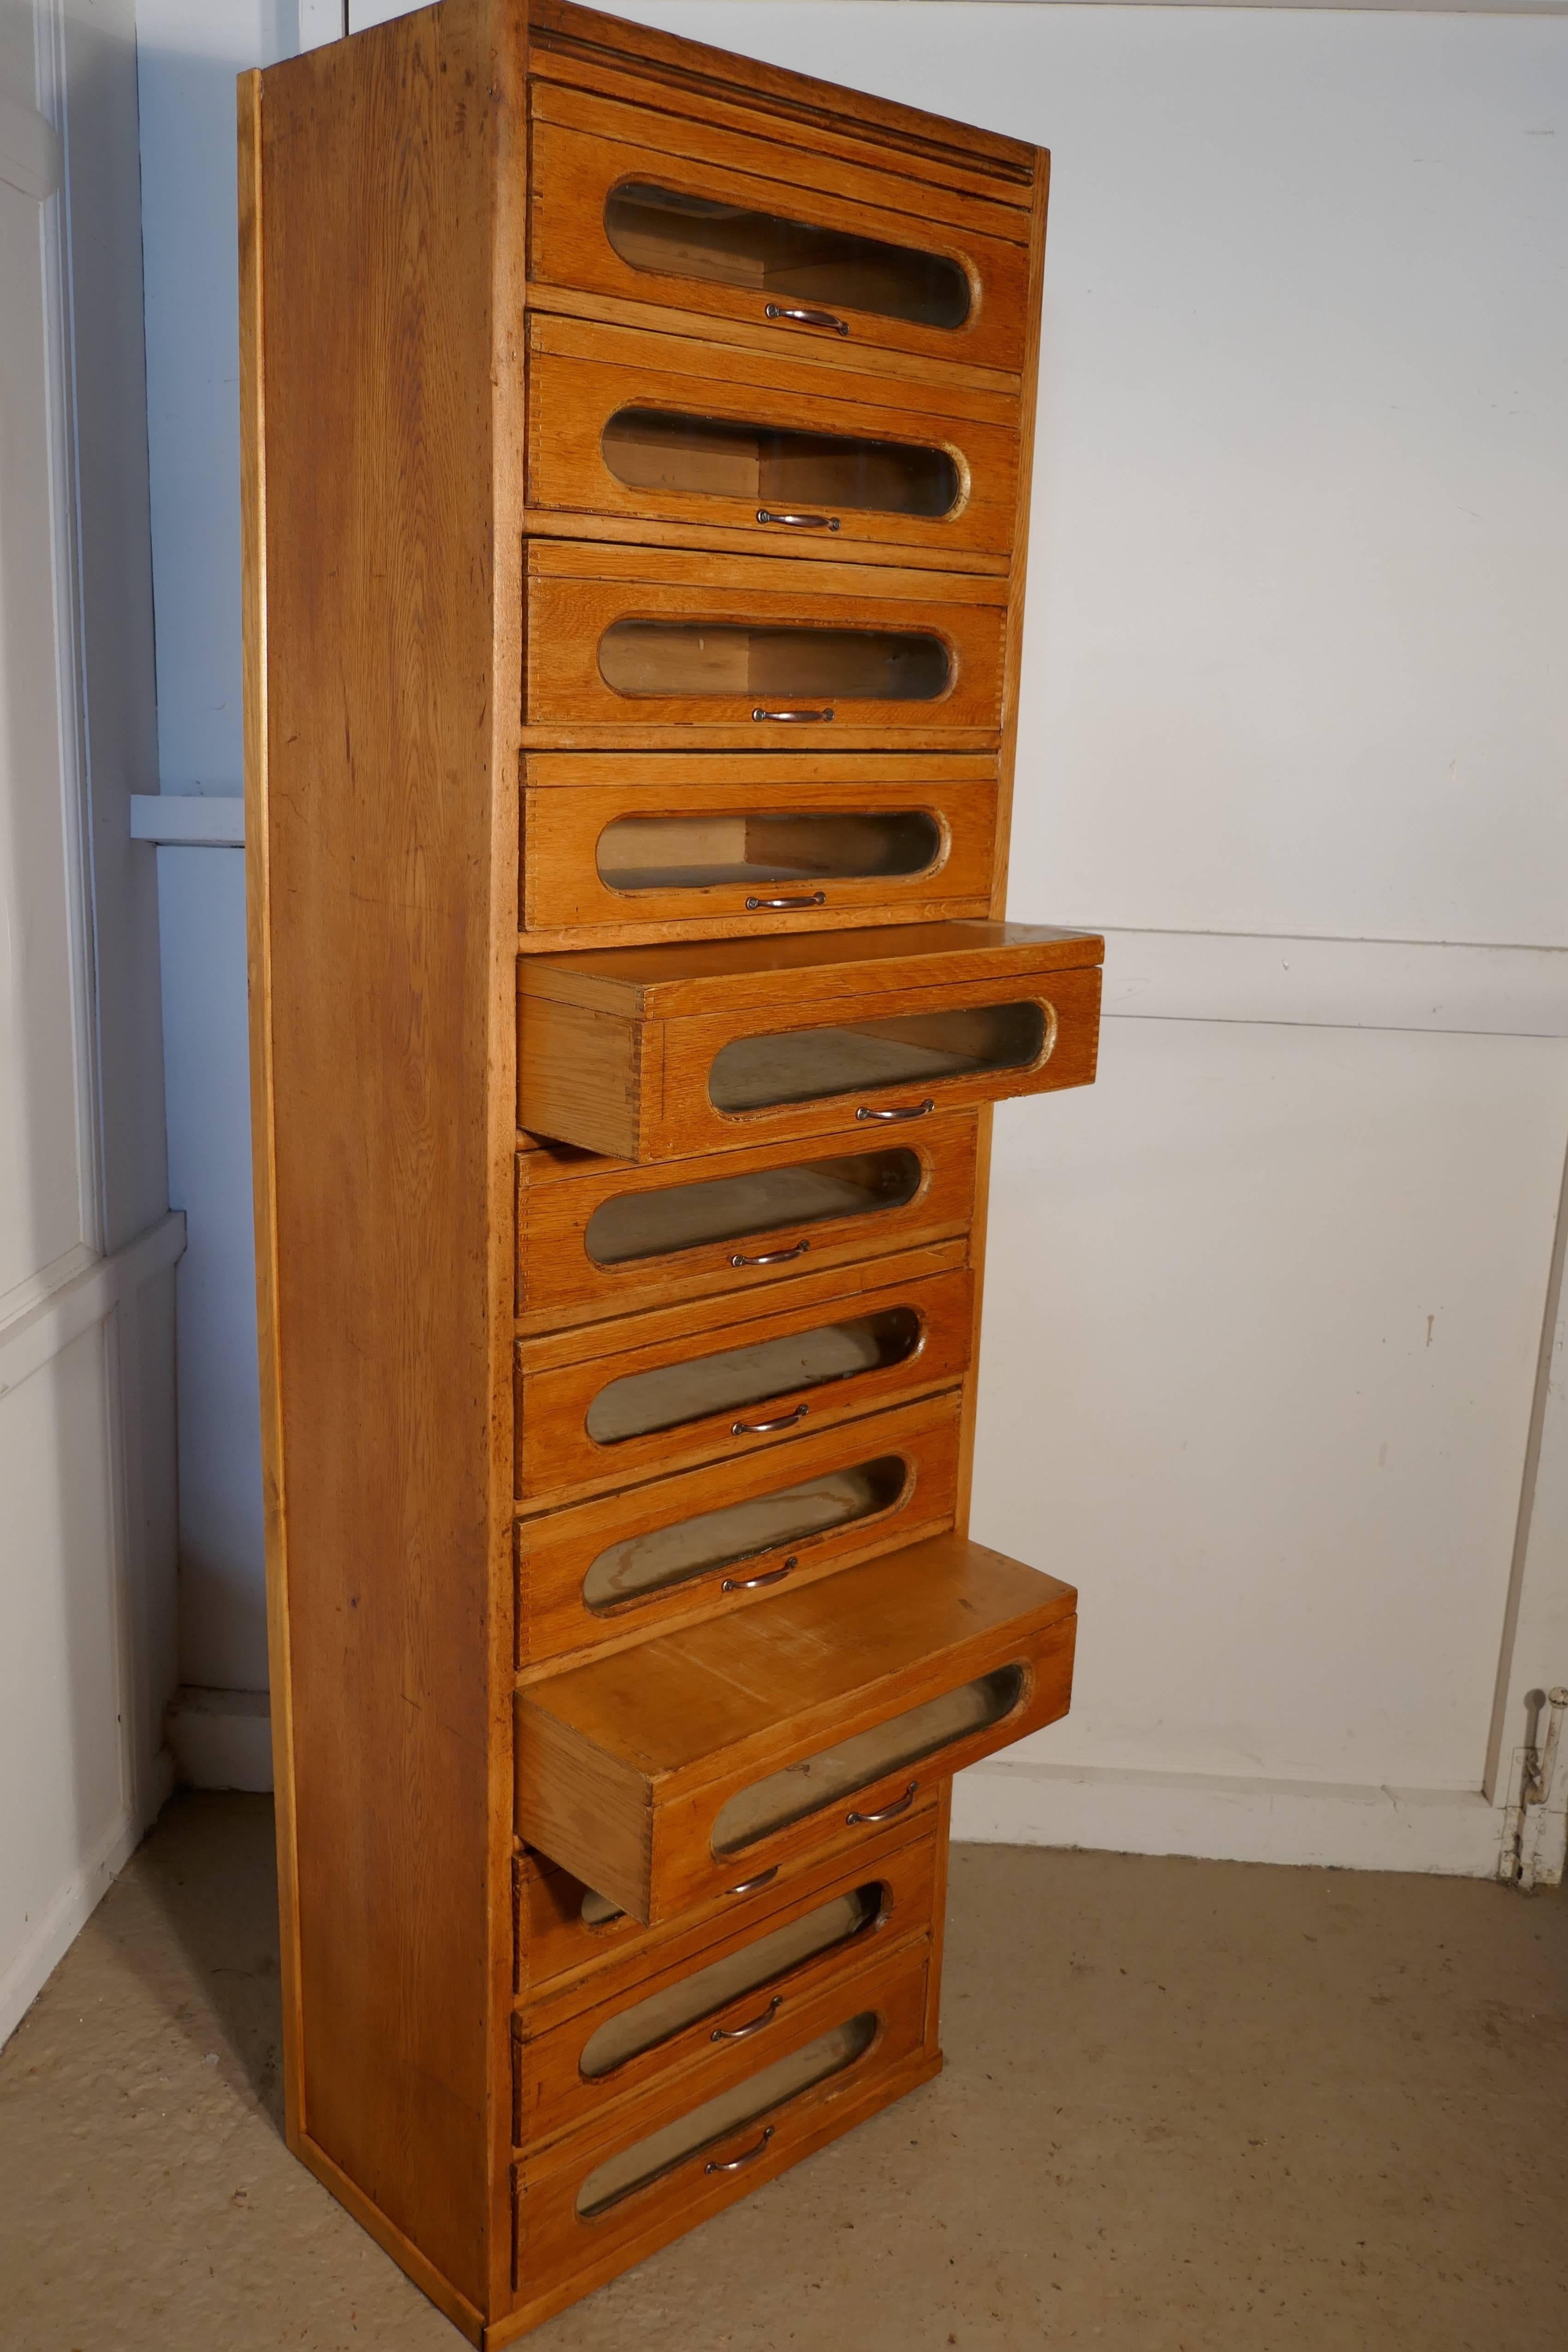 This tall box drawer haberdashery cabinet has unusual lidded drawers, the cabinet has 12 glass fronted drawers, all with wooden lids and copper handles. The cabinet is made in golden oak a piece like this is ideal for any stylish shop interior or